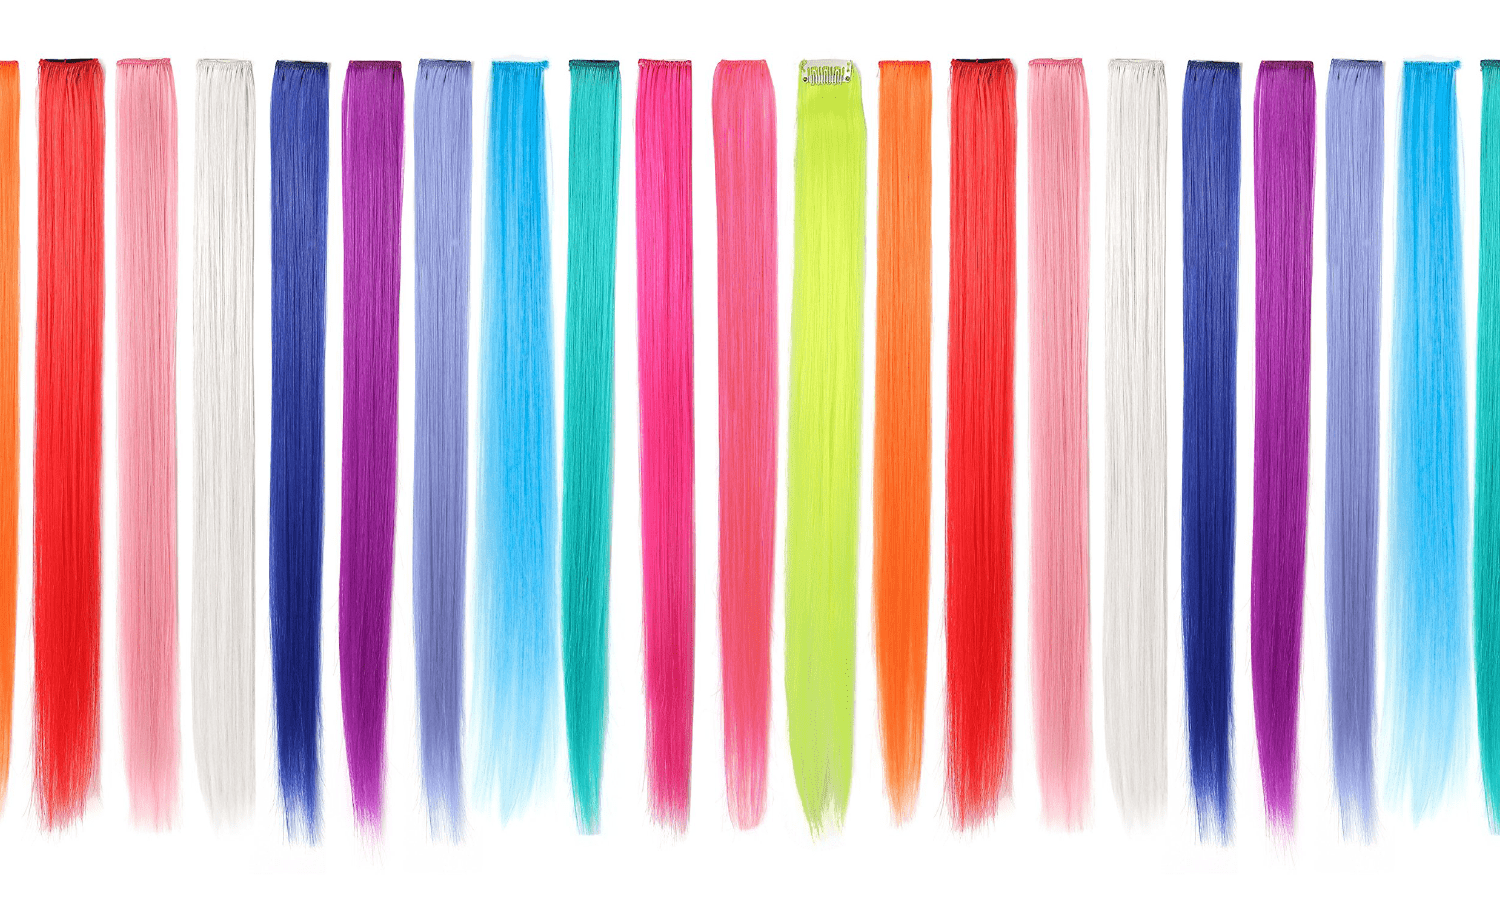 Row of different brightly colored hair extensions